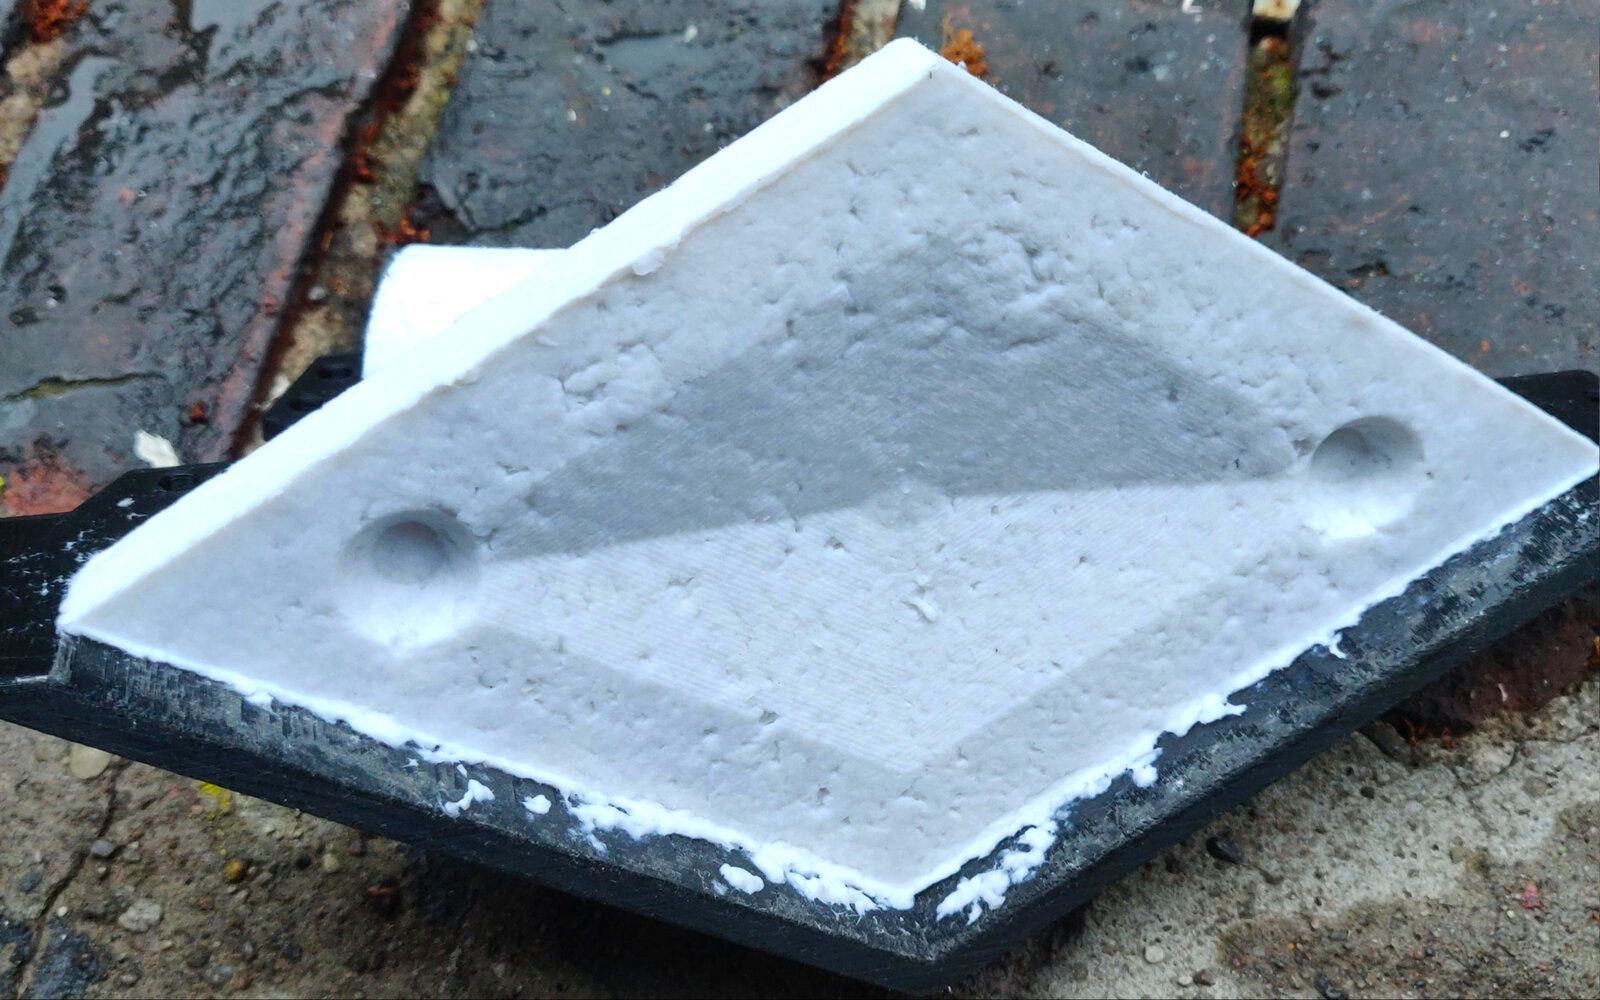 3D printed mold for biodegradable art